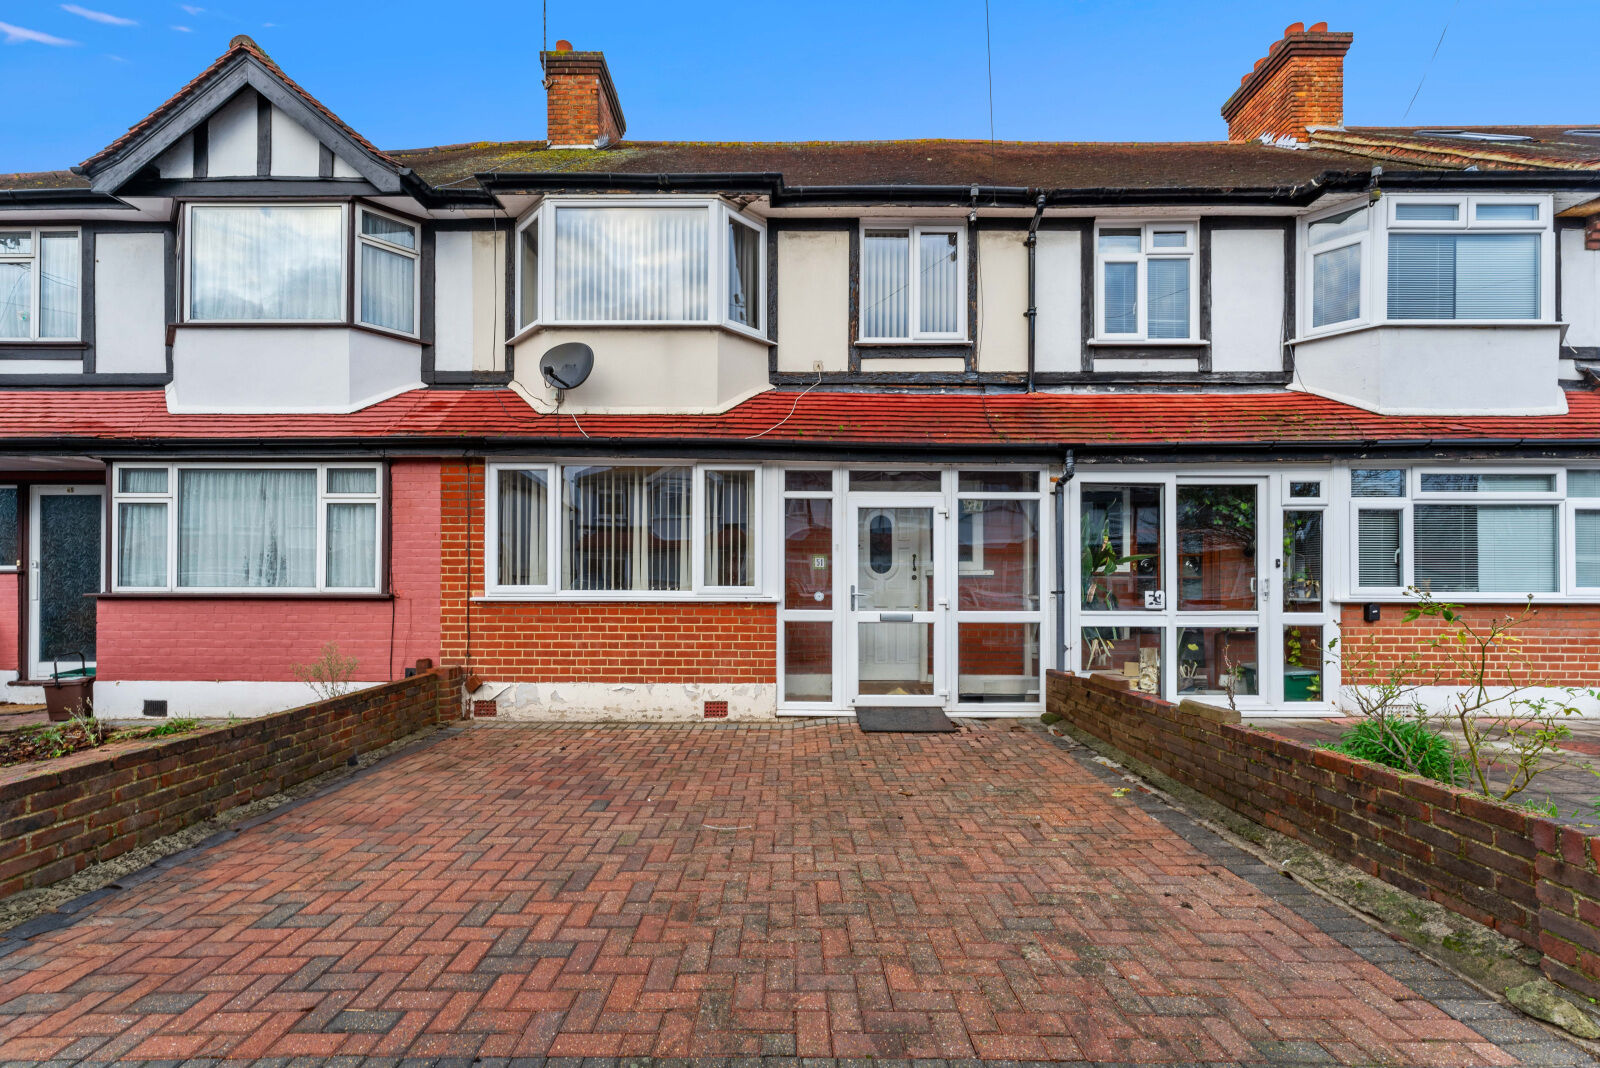 3 bedroom mid terraced house for sale Beech Grove, Mitcham, CR4, main image